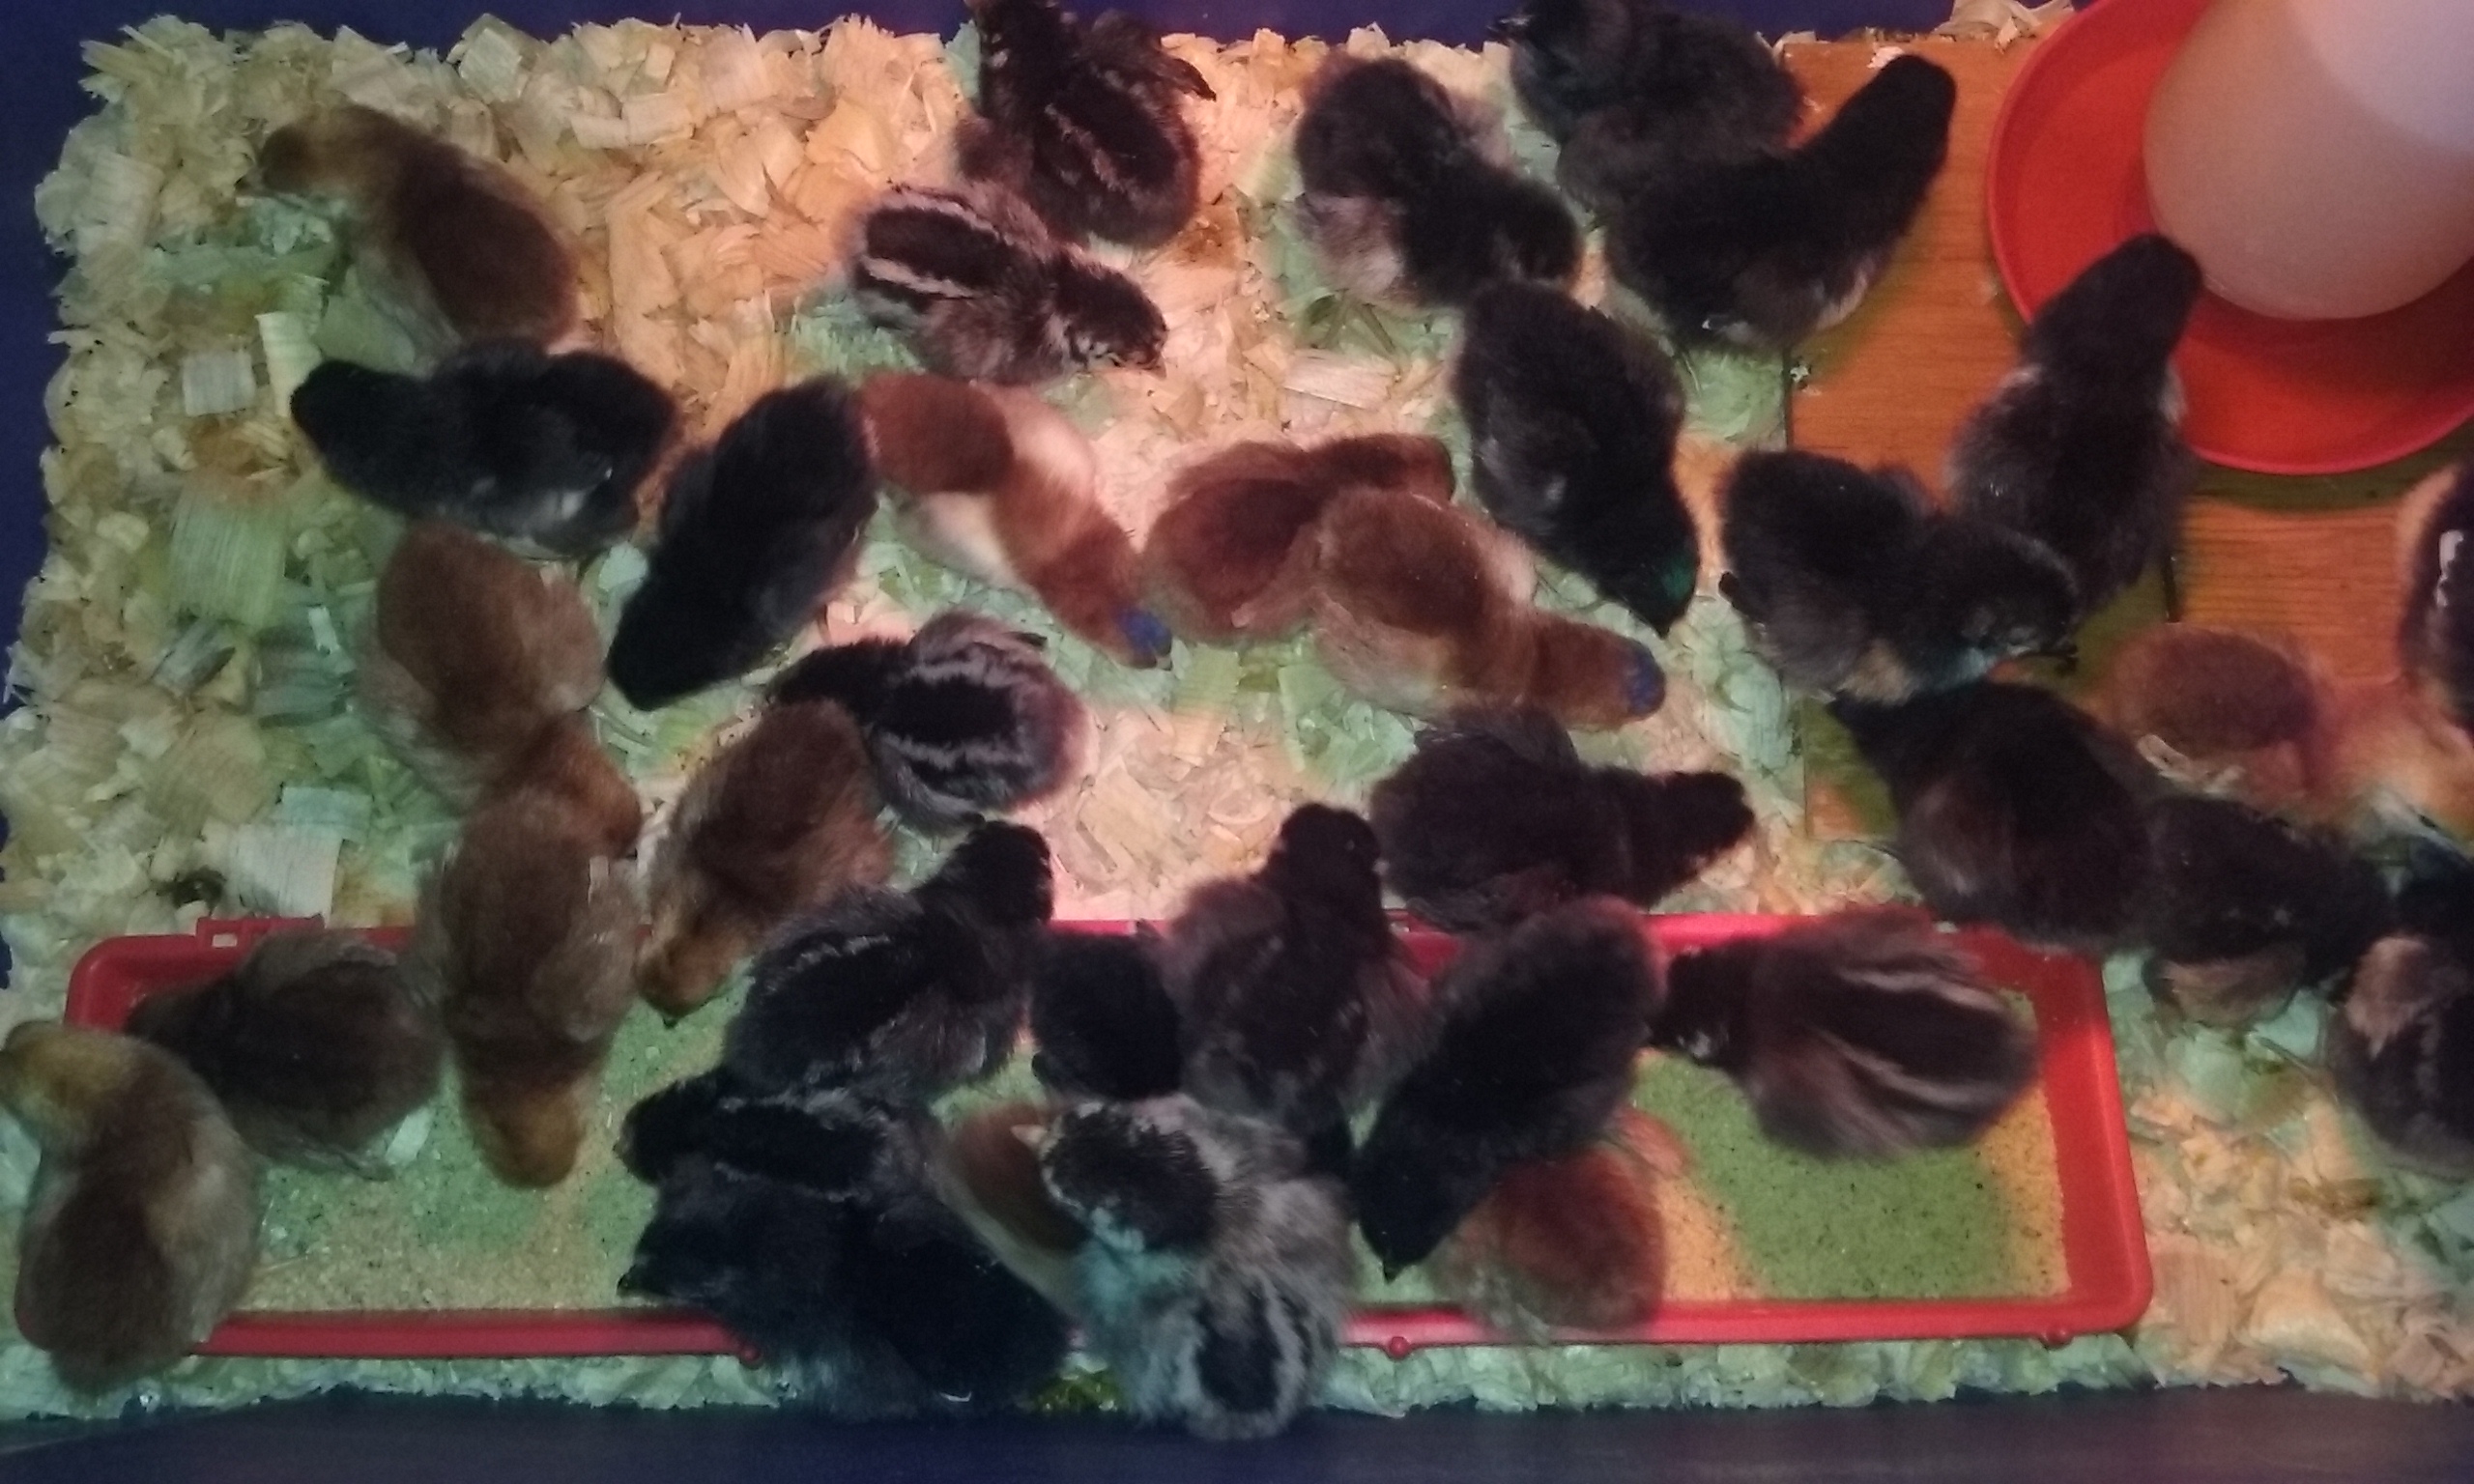 Here's more of the silver laced Wyandottes, Dark Rhode Island Reds,and Black Australorps.